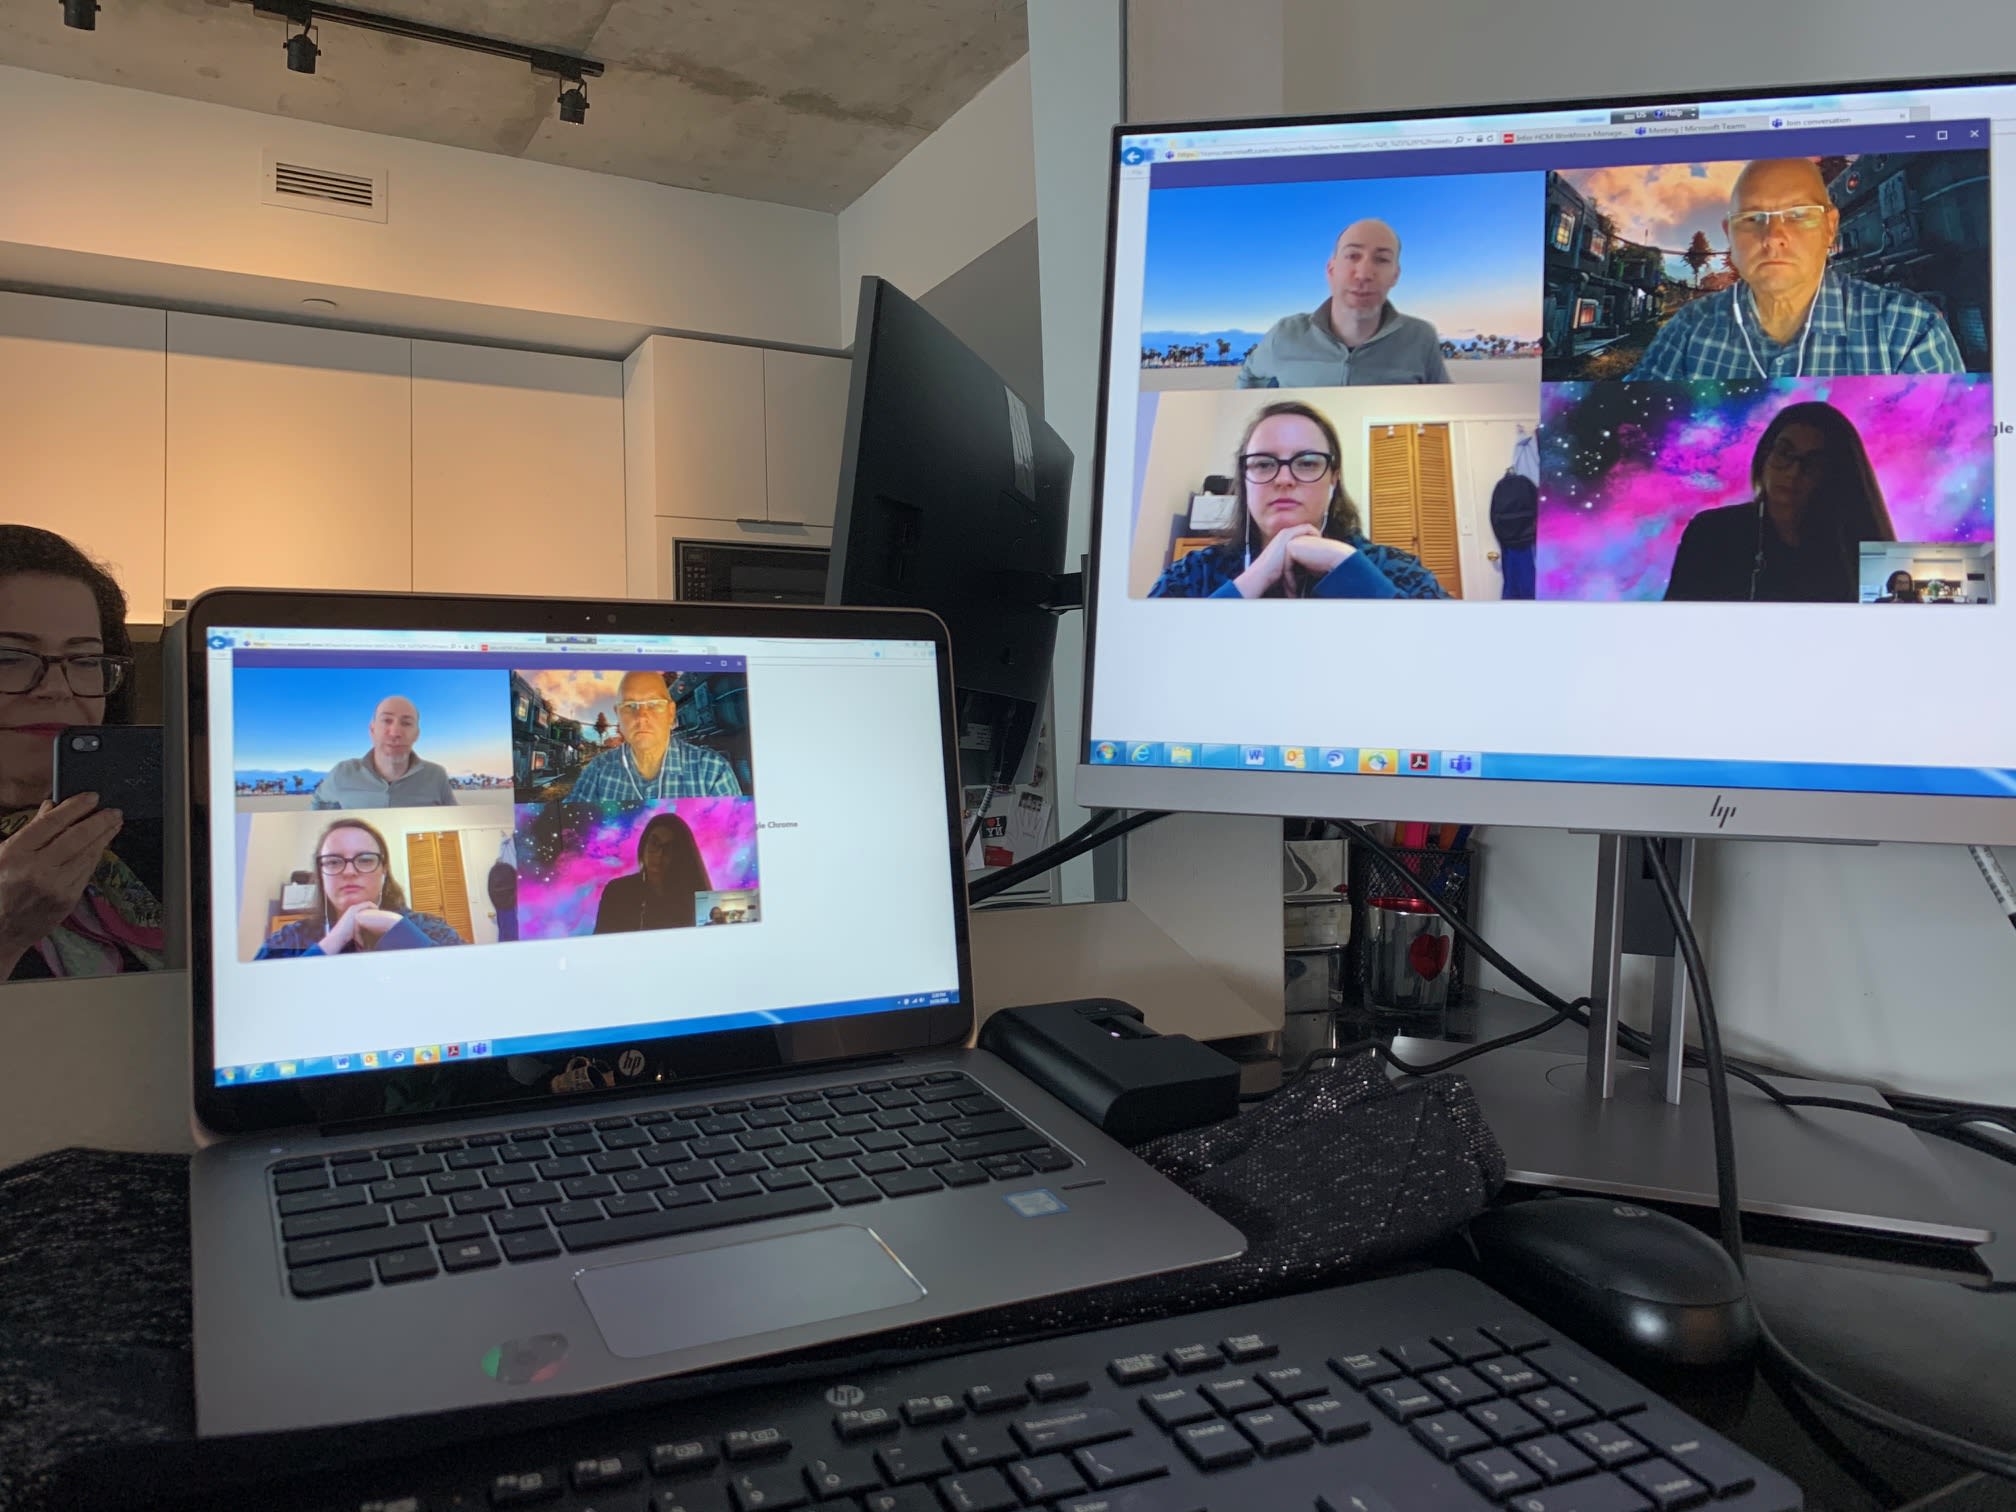 An image showing a virtual meeting.